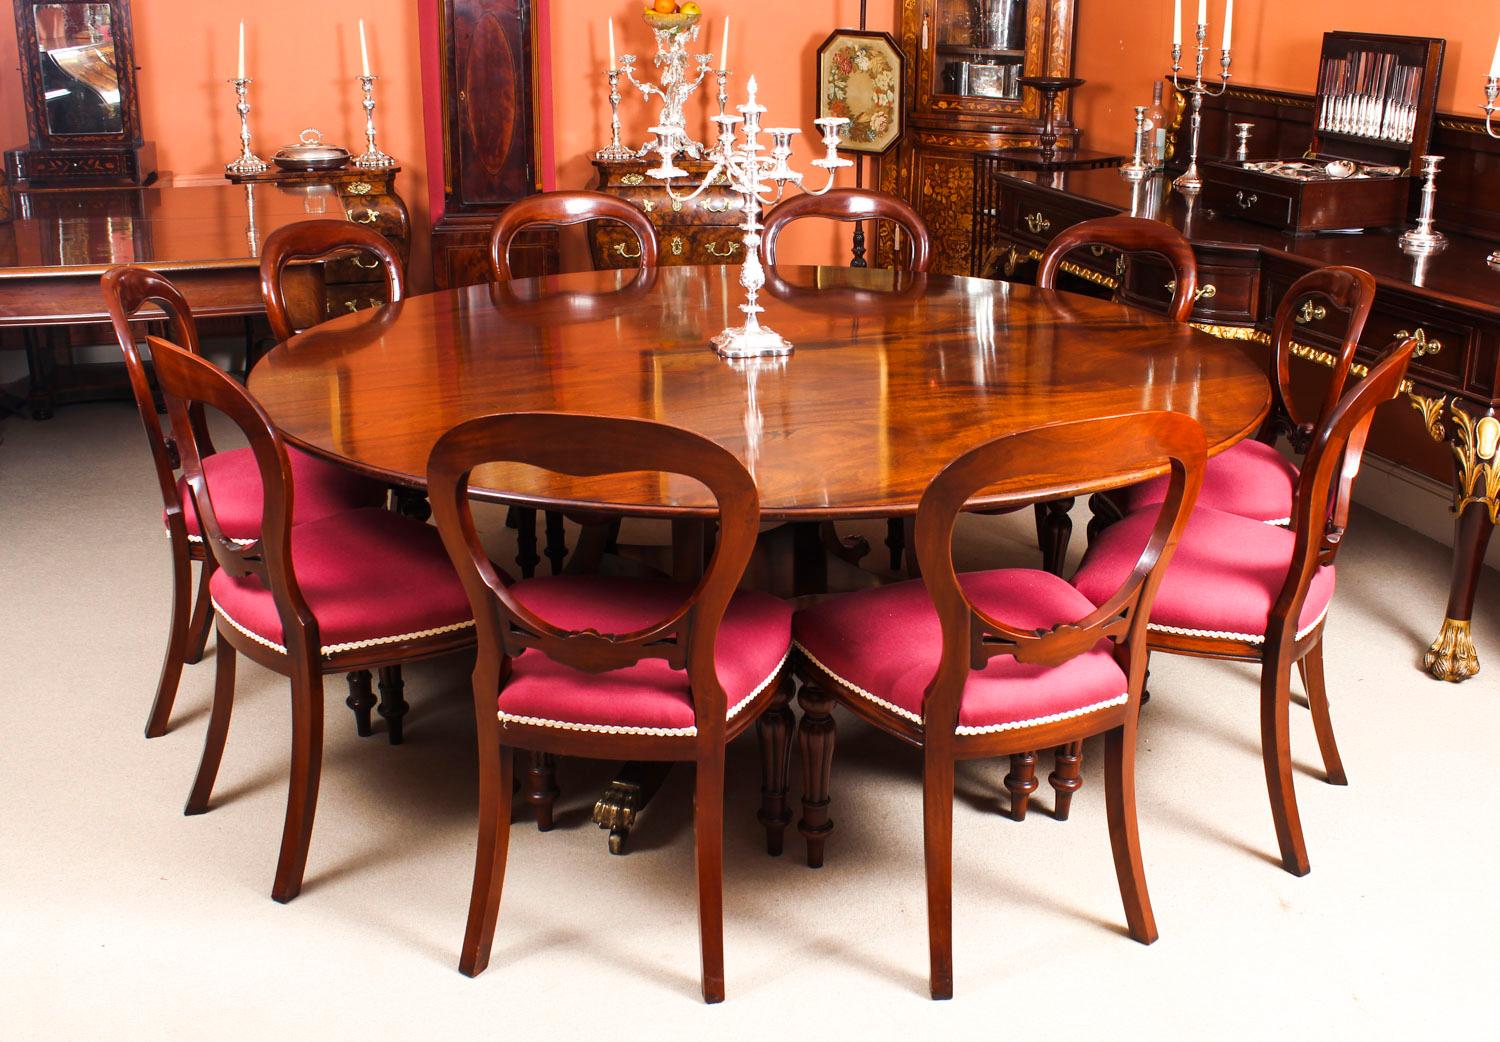 This is a fabulous dining set comprising a very large Vintage Regency style dining table by William Tillman, bought from Harrods, Knightsbridge, London and a set of ten mahogany ballon back dining chairs, late 20th century in date.

The table top